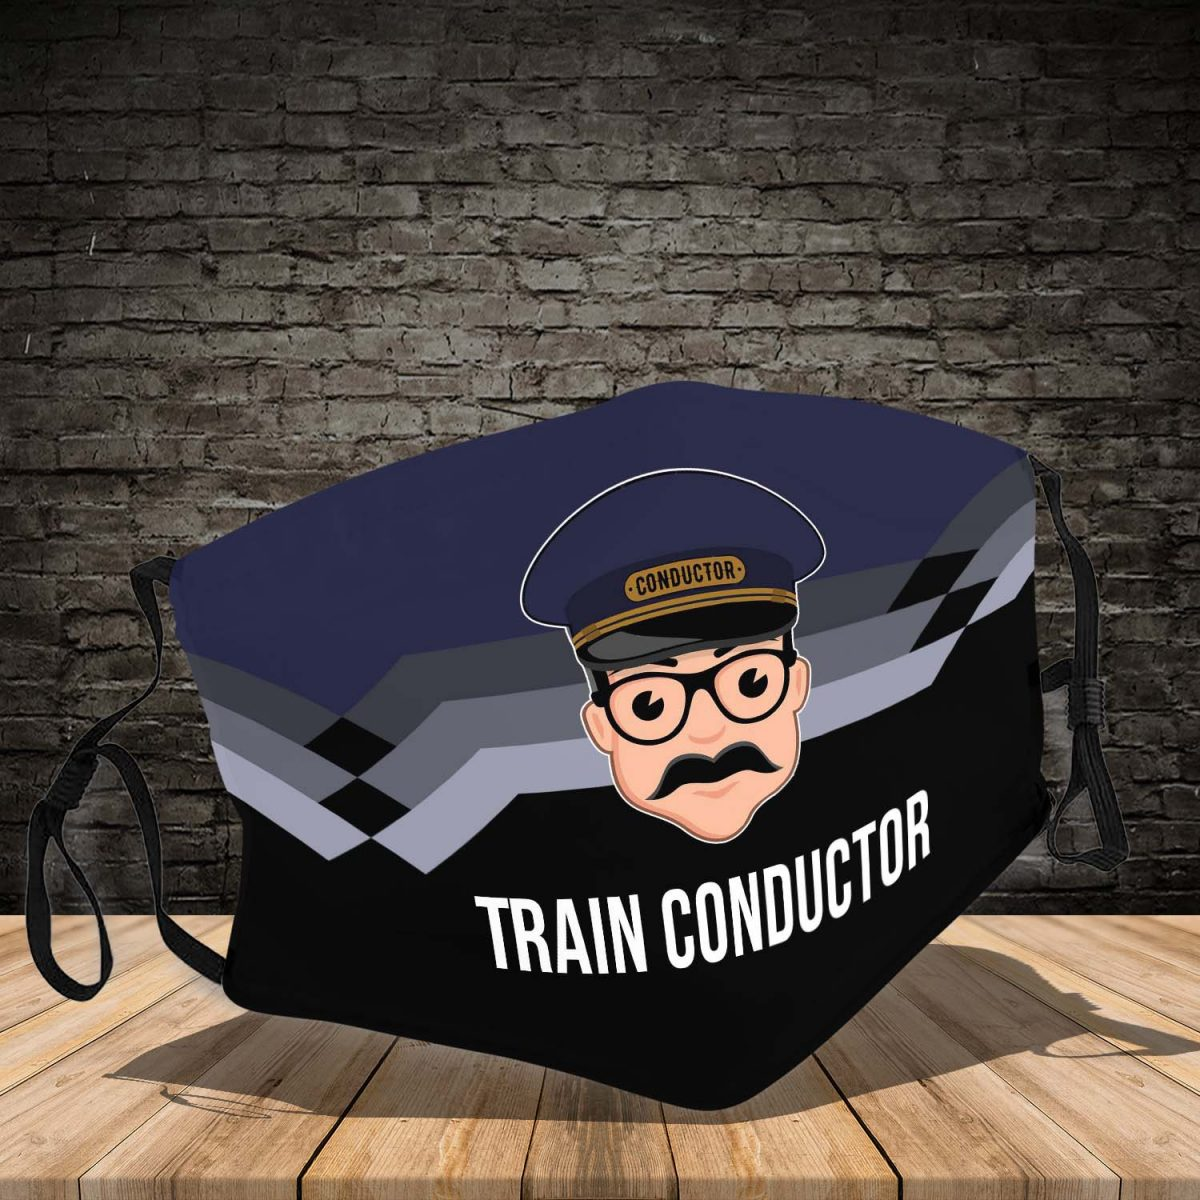 Train Conductor 3d face mask